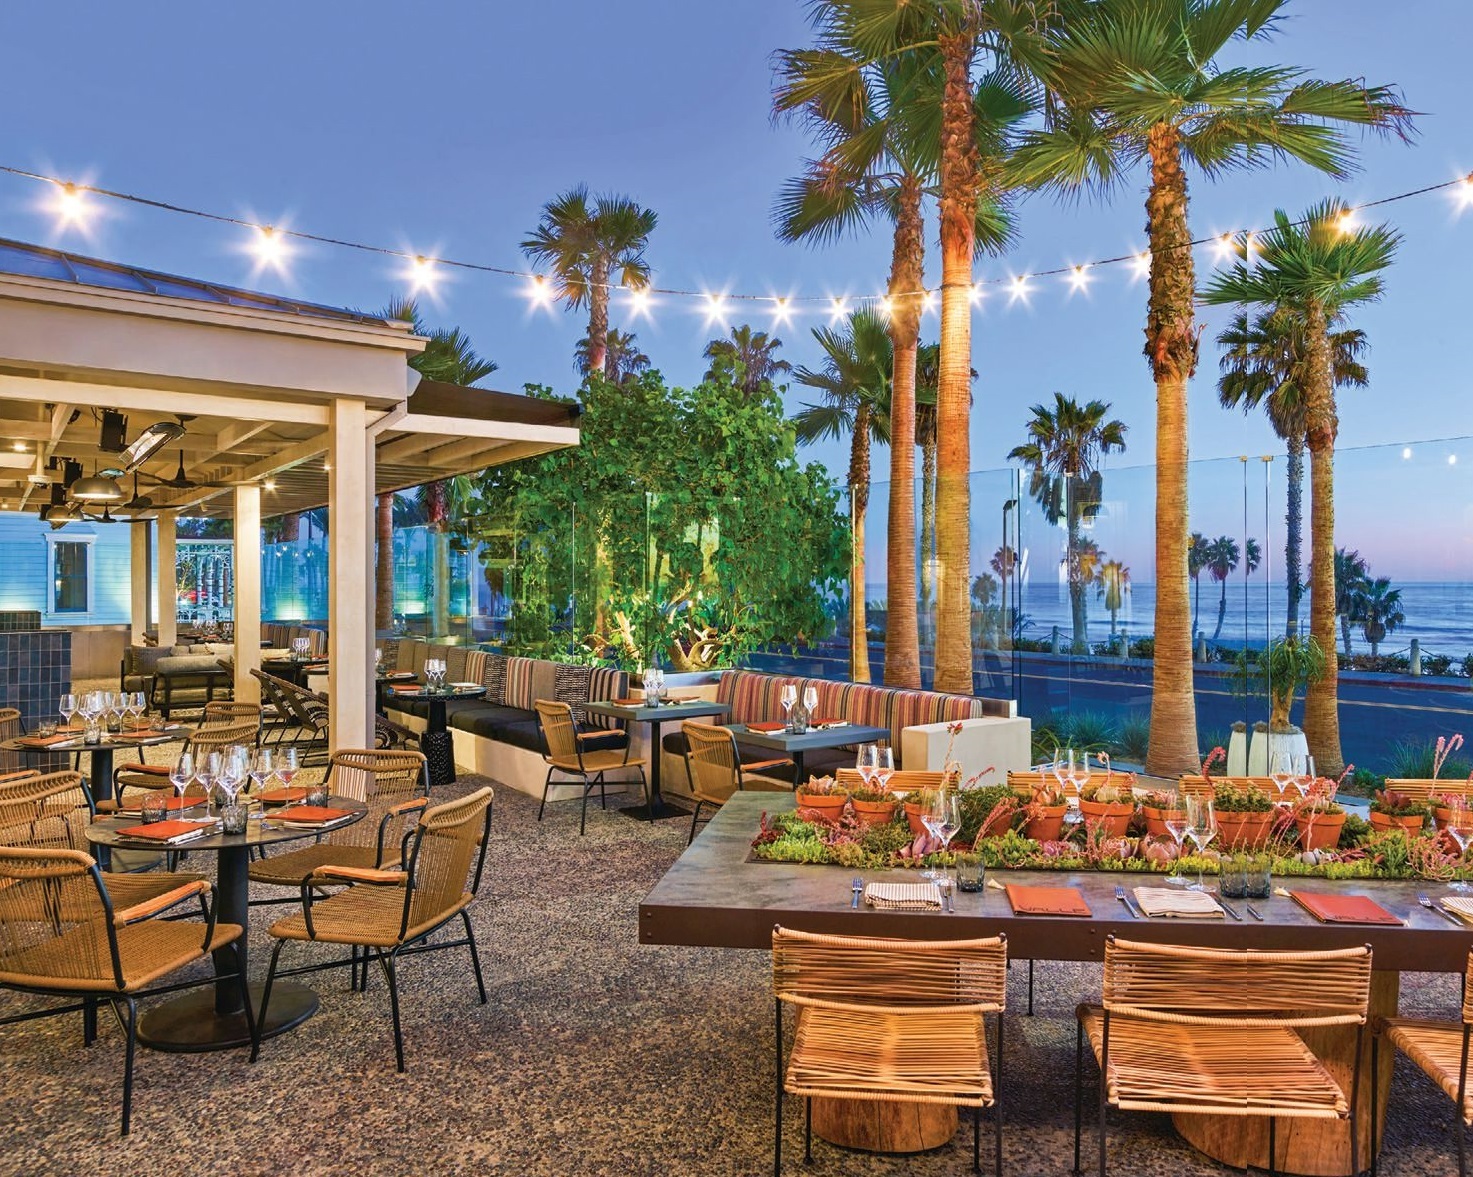 Dine with ocean views at Valle at Mission Pacific Hotel in Oceanside. COURTESY OF VALLE